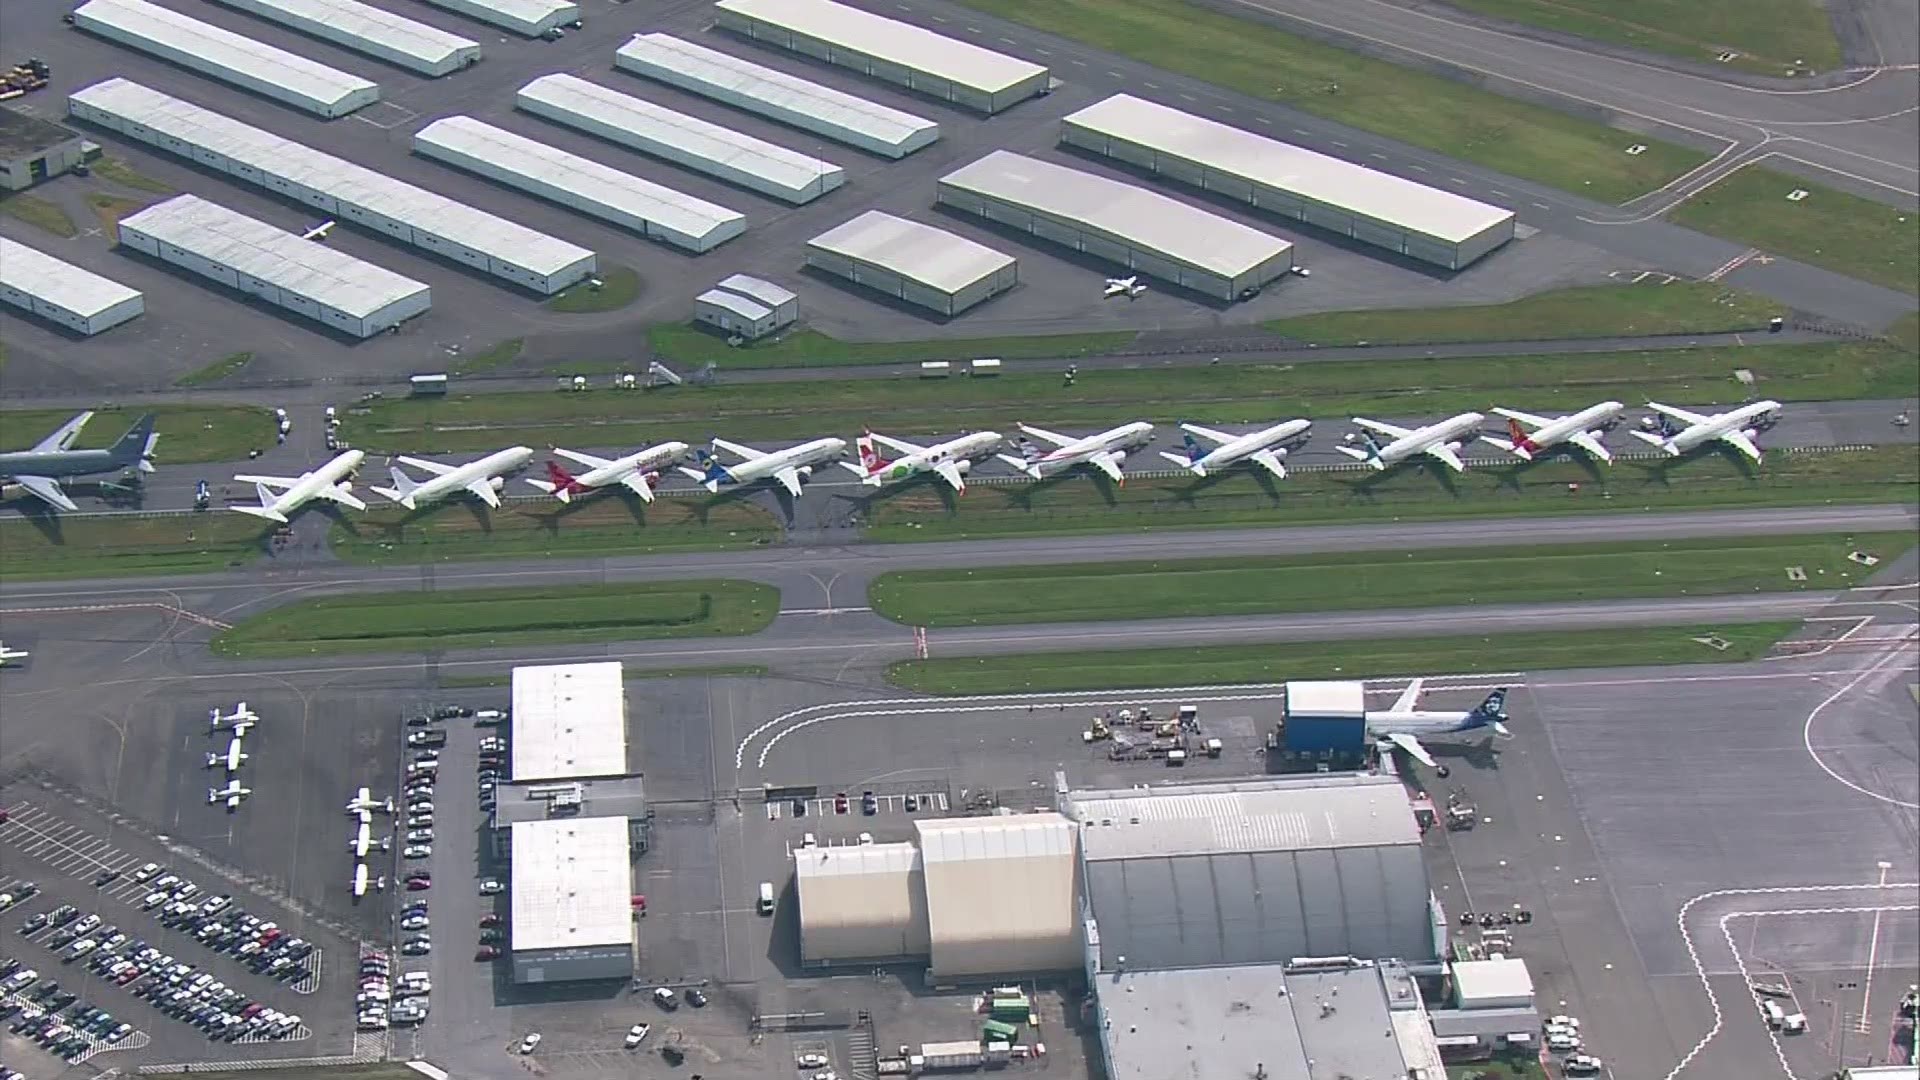 Aerials of Boeing 737 MAX planes still grounded at Everett's Paine Field in June 2019